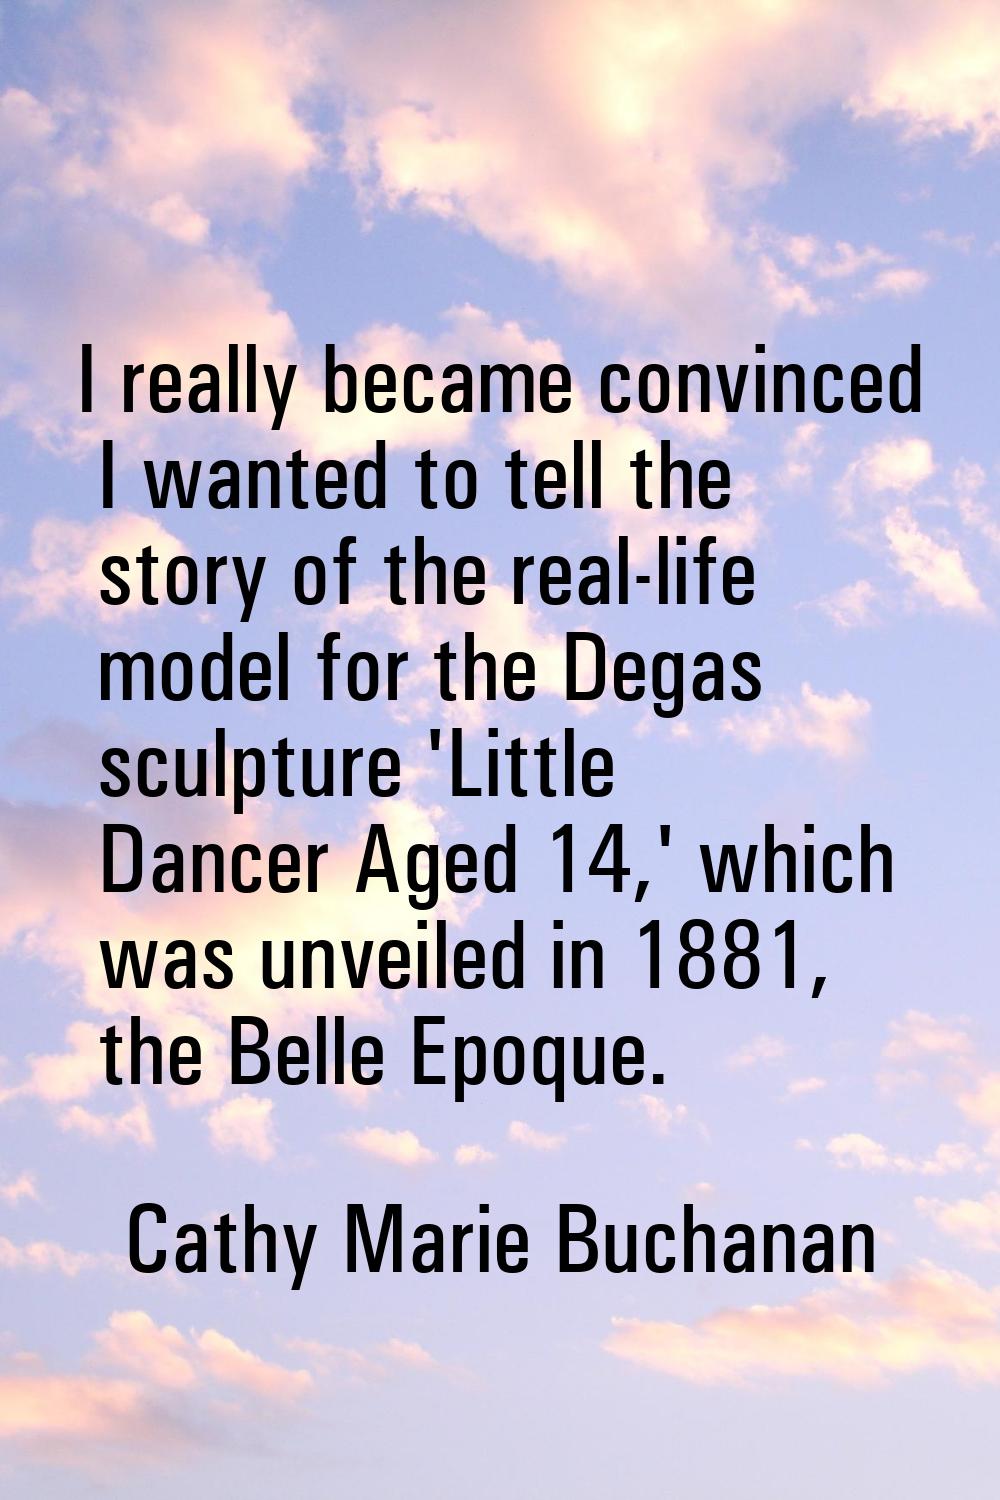 I really became convinced I wanted to tell the story of the real-life model for the Degas sculpture